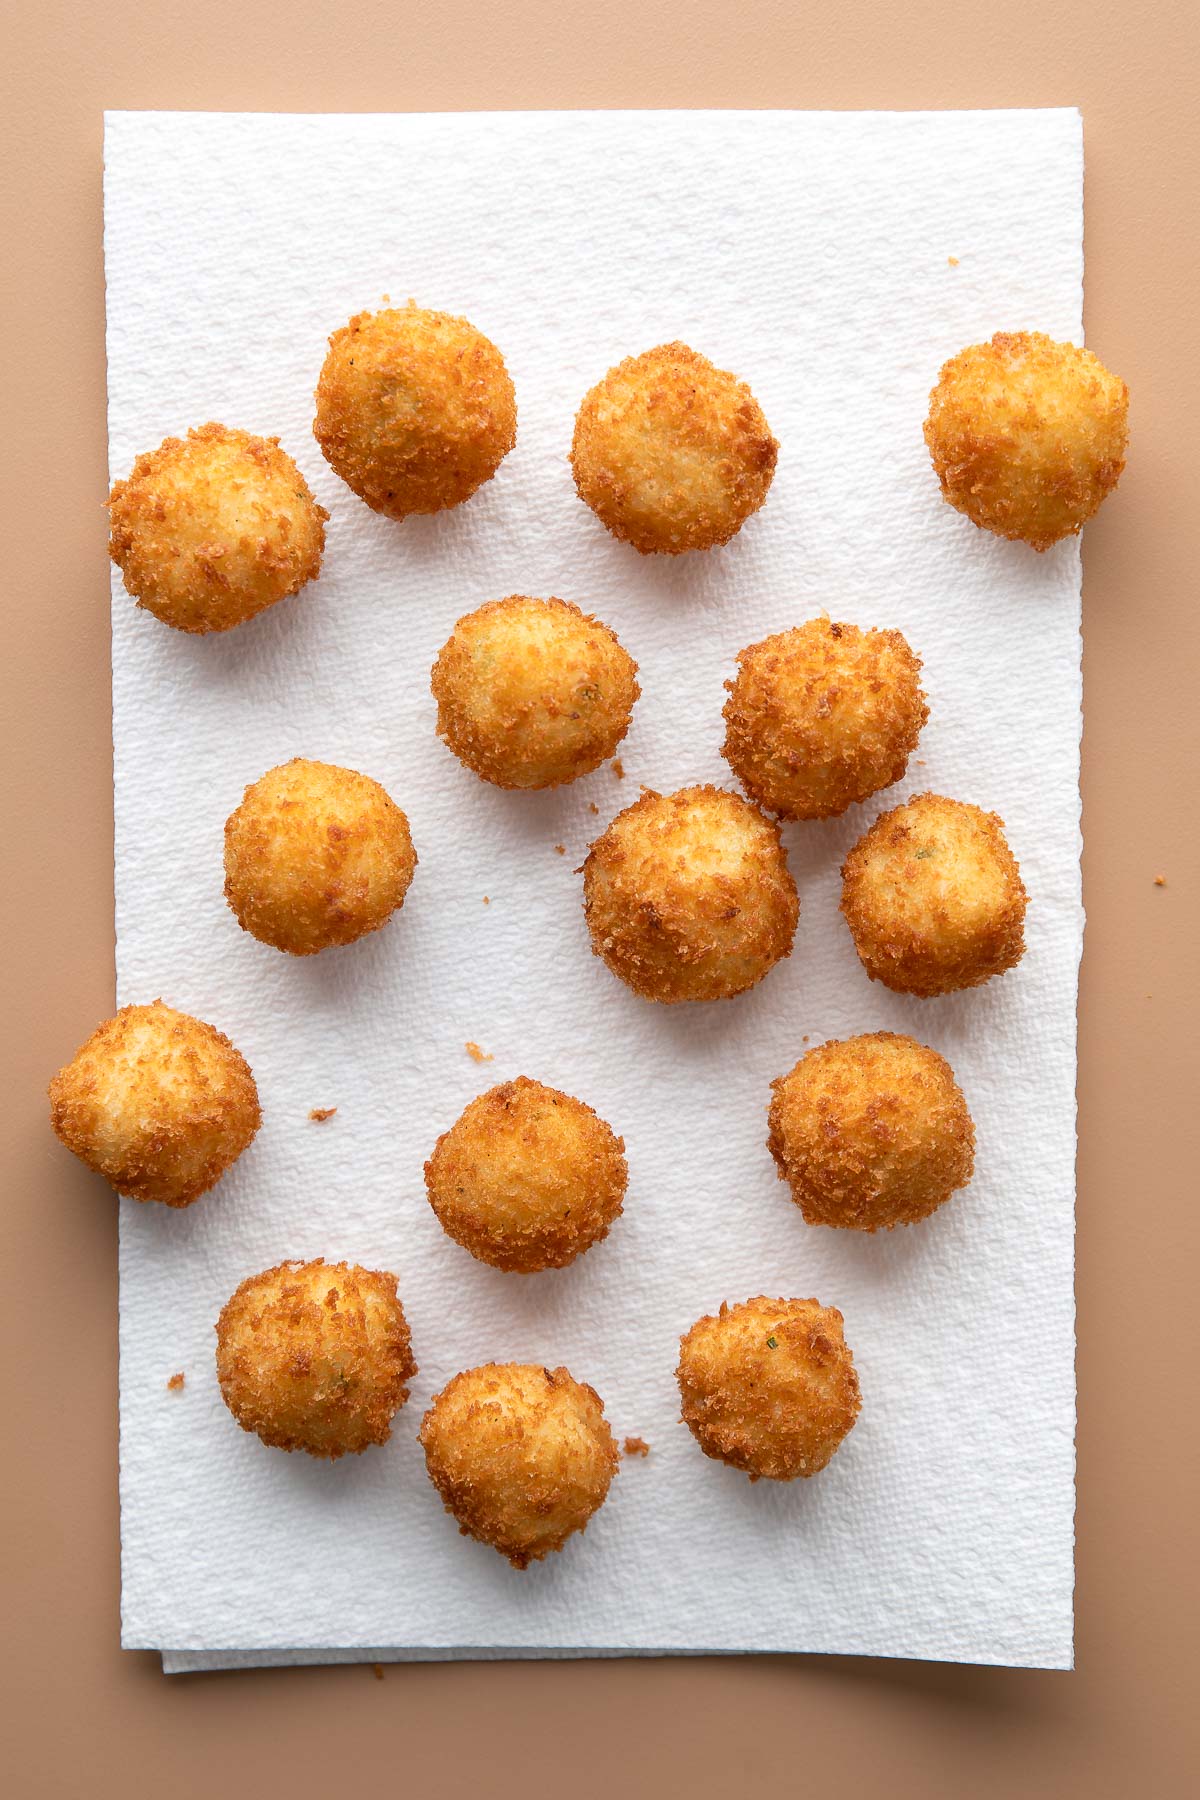 transfer mashed potato balls from hot oil to paper towels to drain